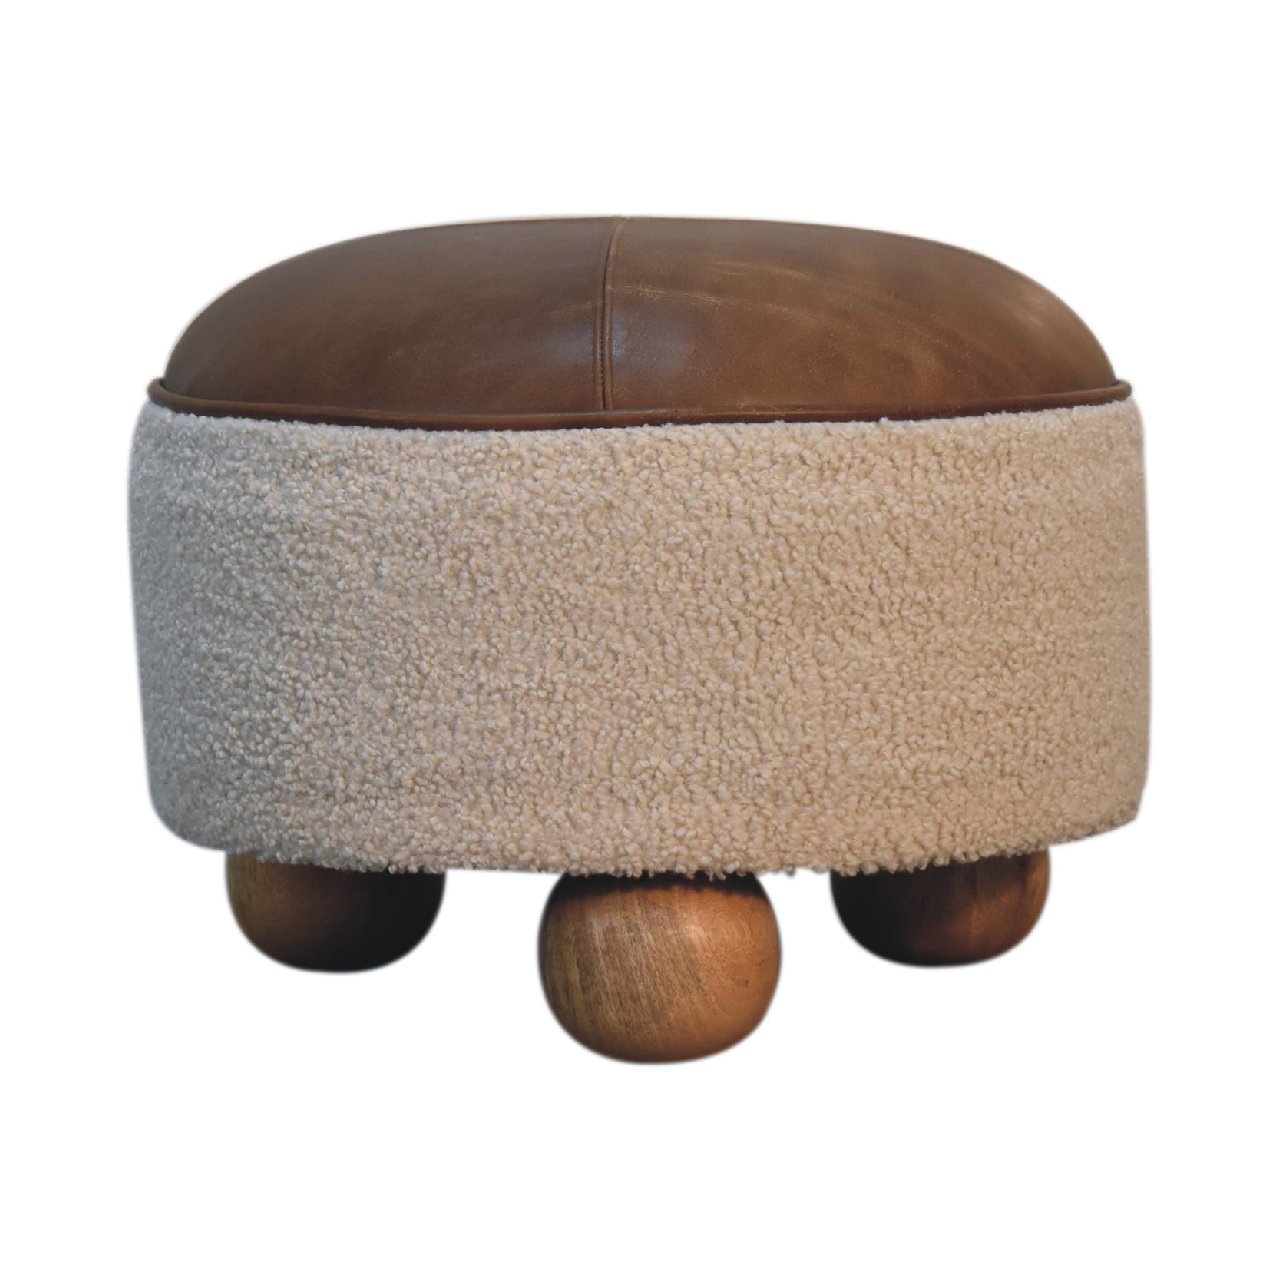 View Cream Boucle Buffalo Hide Round Footstool with Ball Feet information